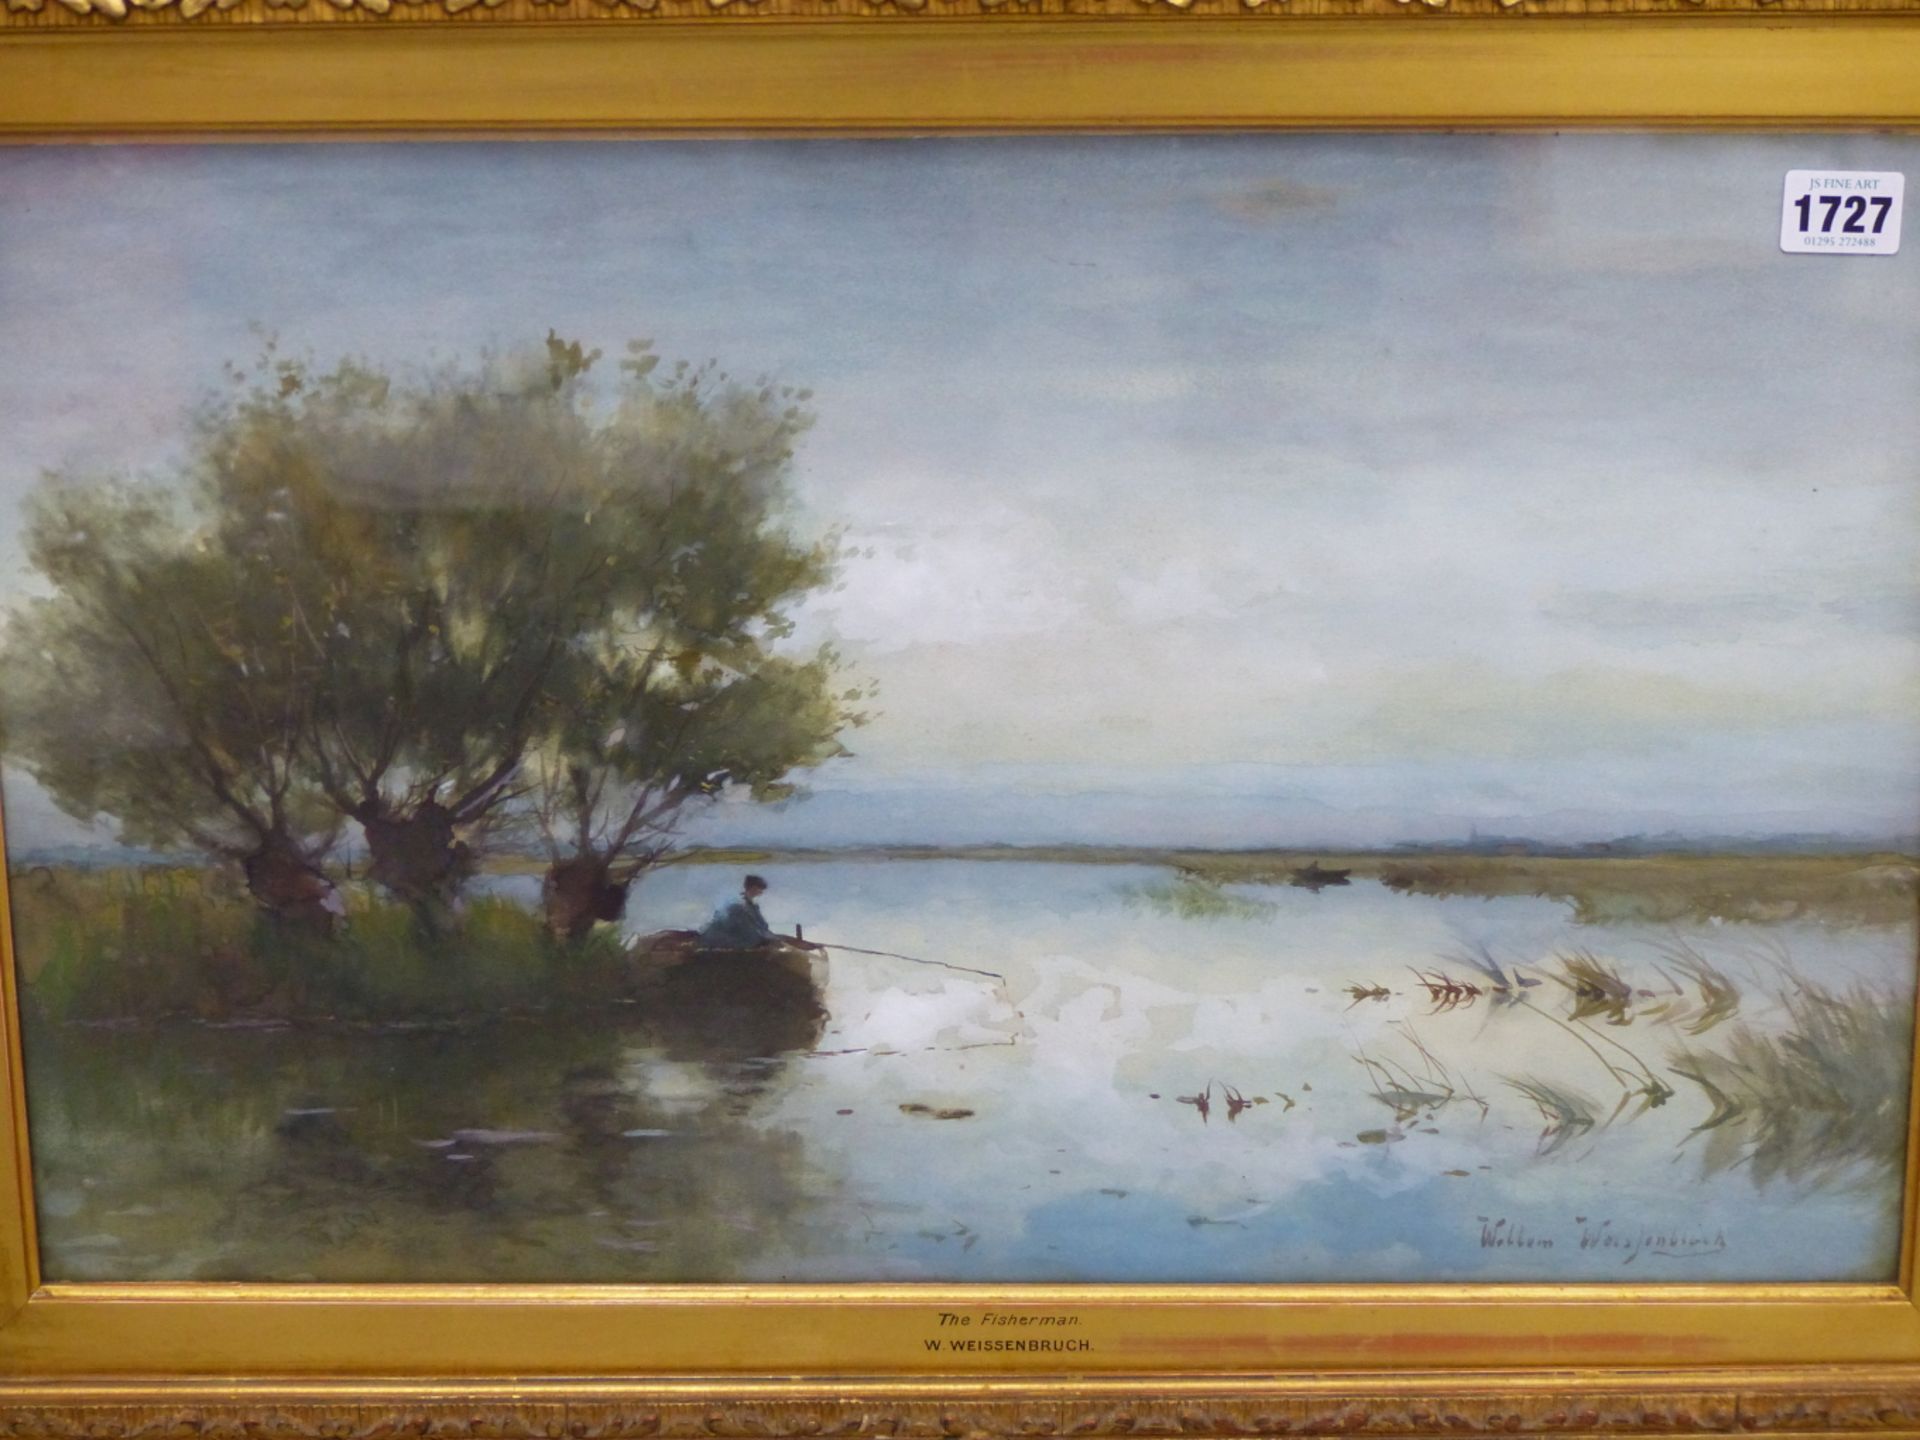 WILLEM WEISSENBRUCH ( 1864-1941) THE FISHERMAN. WATERCOLOUR. SIGNED L/R. TITLED TO FRAME. 52 X 33